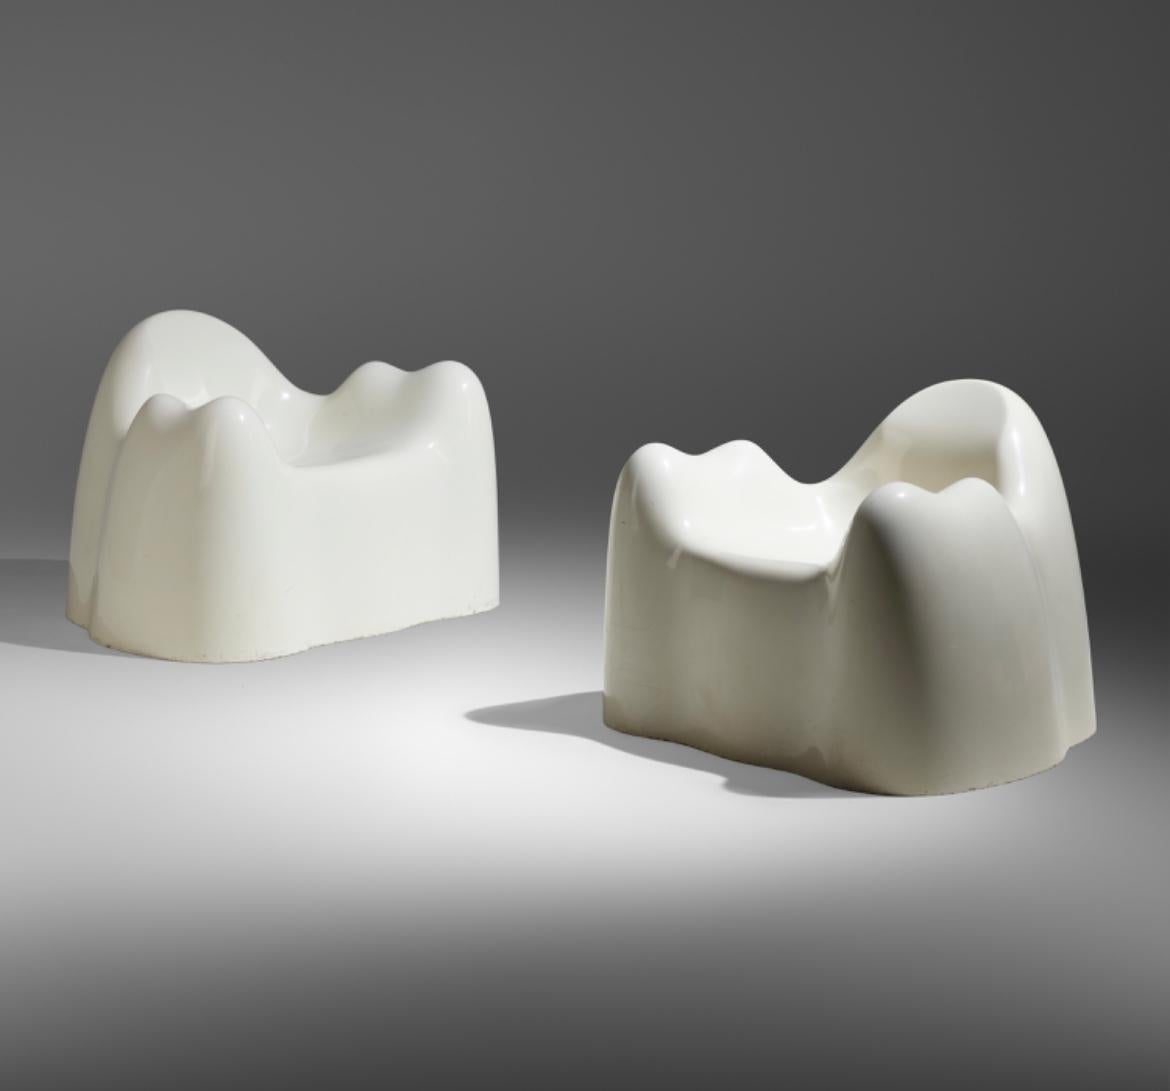 Three Molar chairs by Wendell Castle, USA, 1969. Gel-coated fiberglass and vinyl, in great condition. 
This work is part of the open-editioned Molar series and the model registered with the artist's studio as number 13. 

Can be purchased as a set